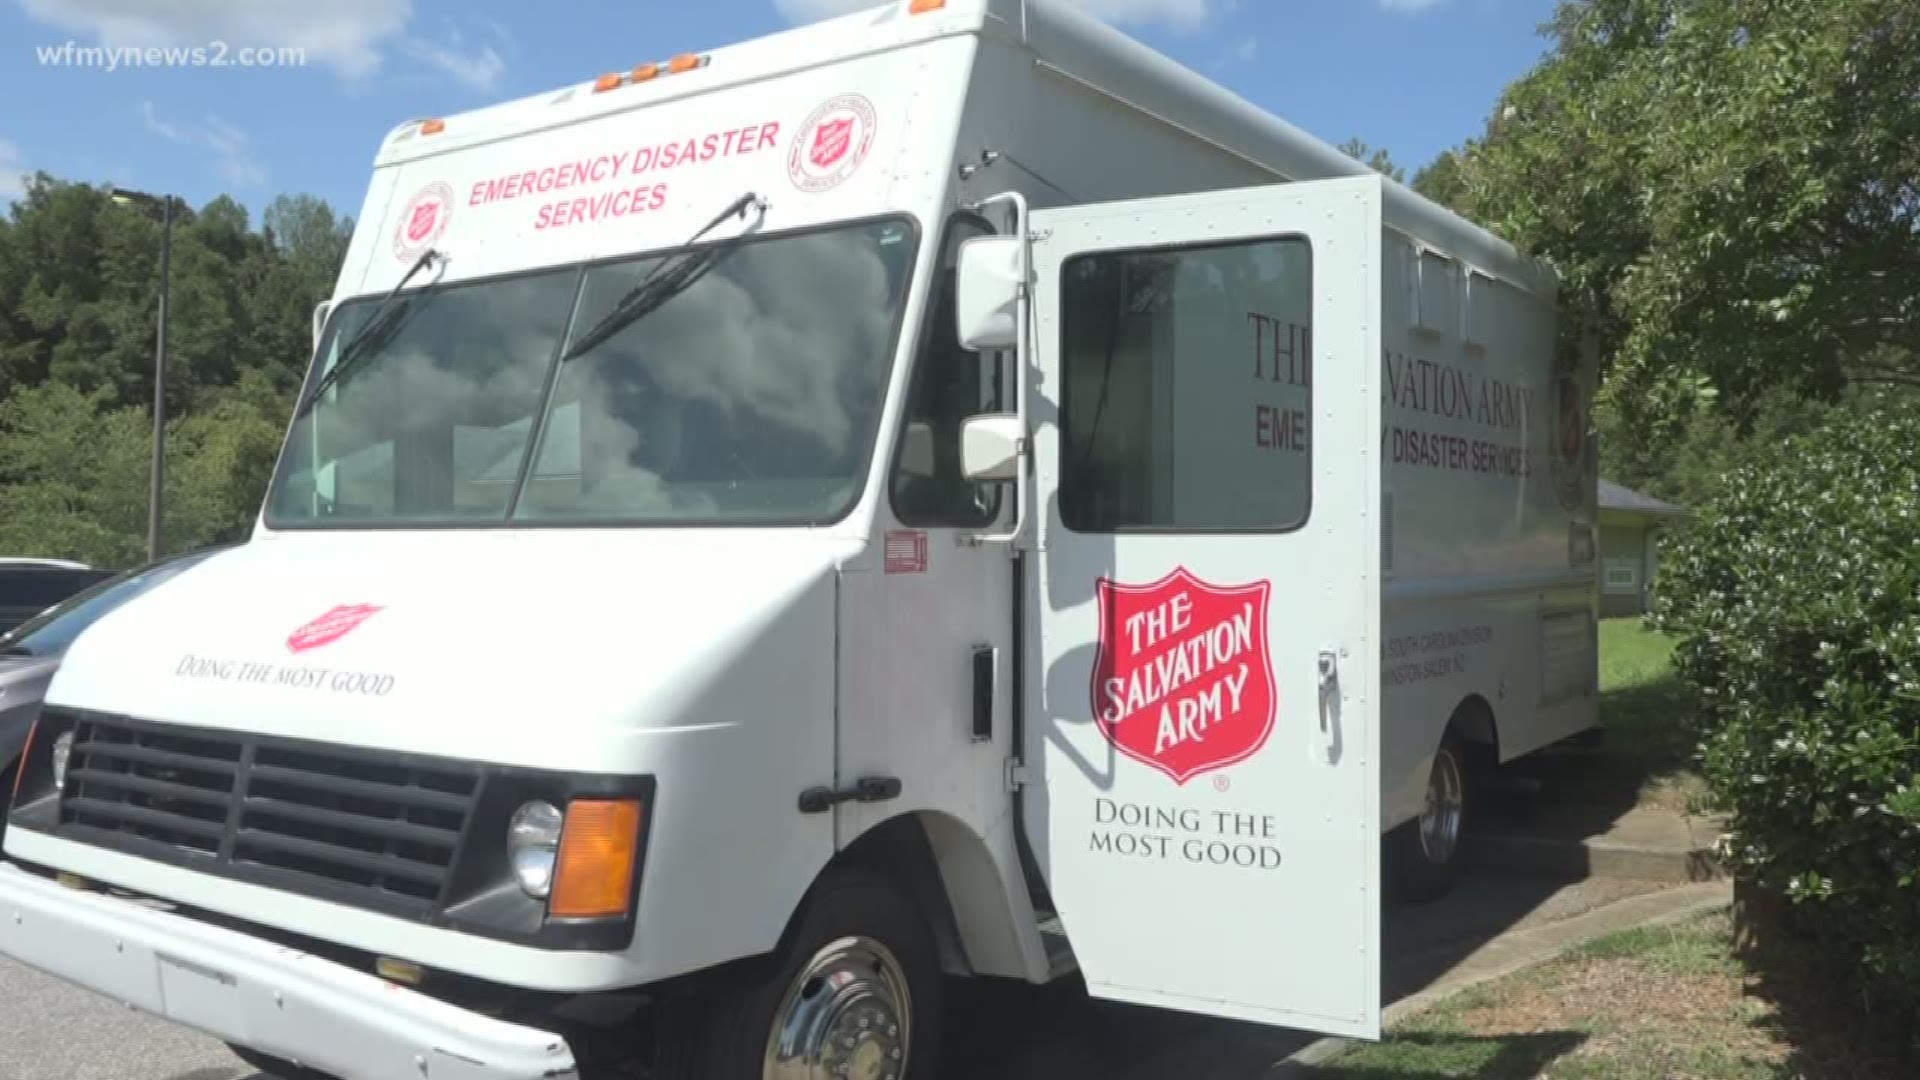 The mobile canteen from the Winston-Salem and Greensboro Salvation Army is heading to Charleston, South Carolina ahead of Hurricane Dorian to help first responders prepare.